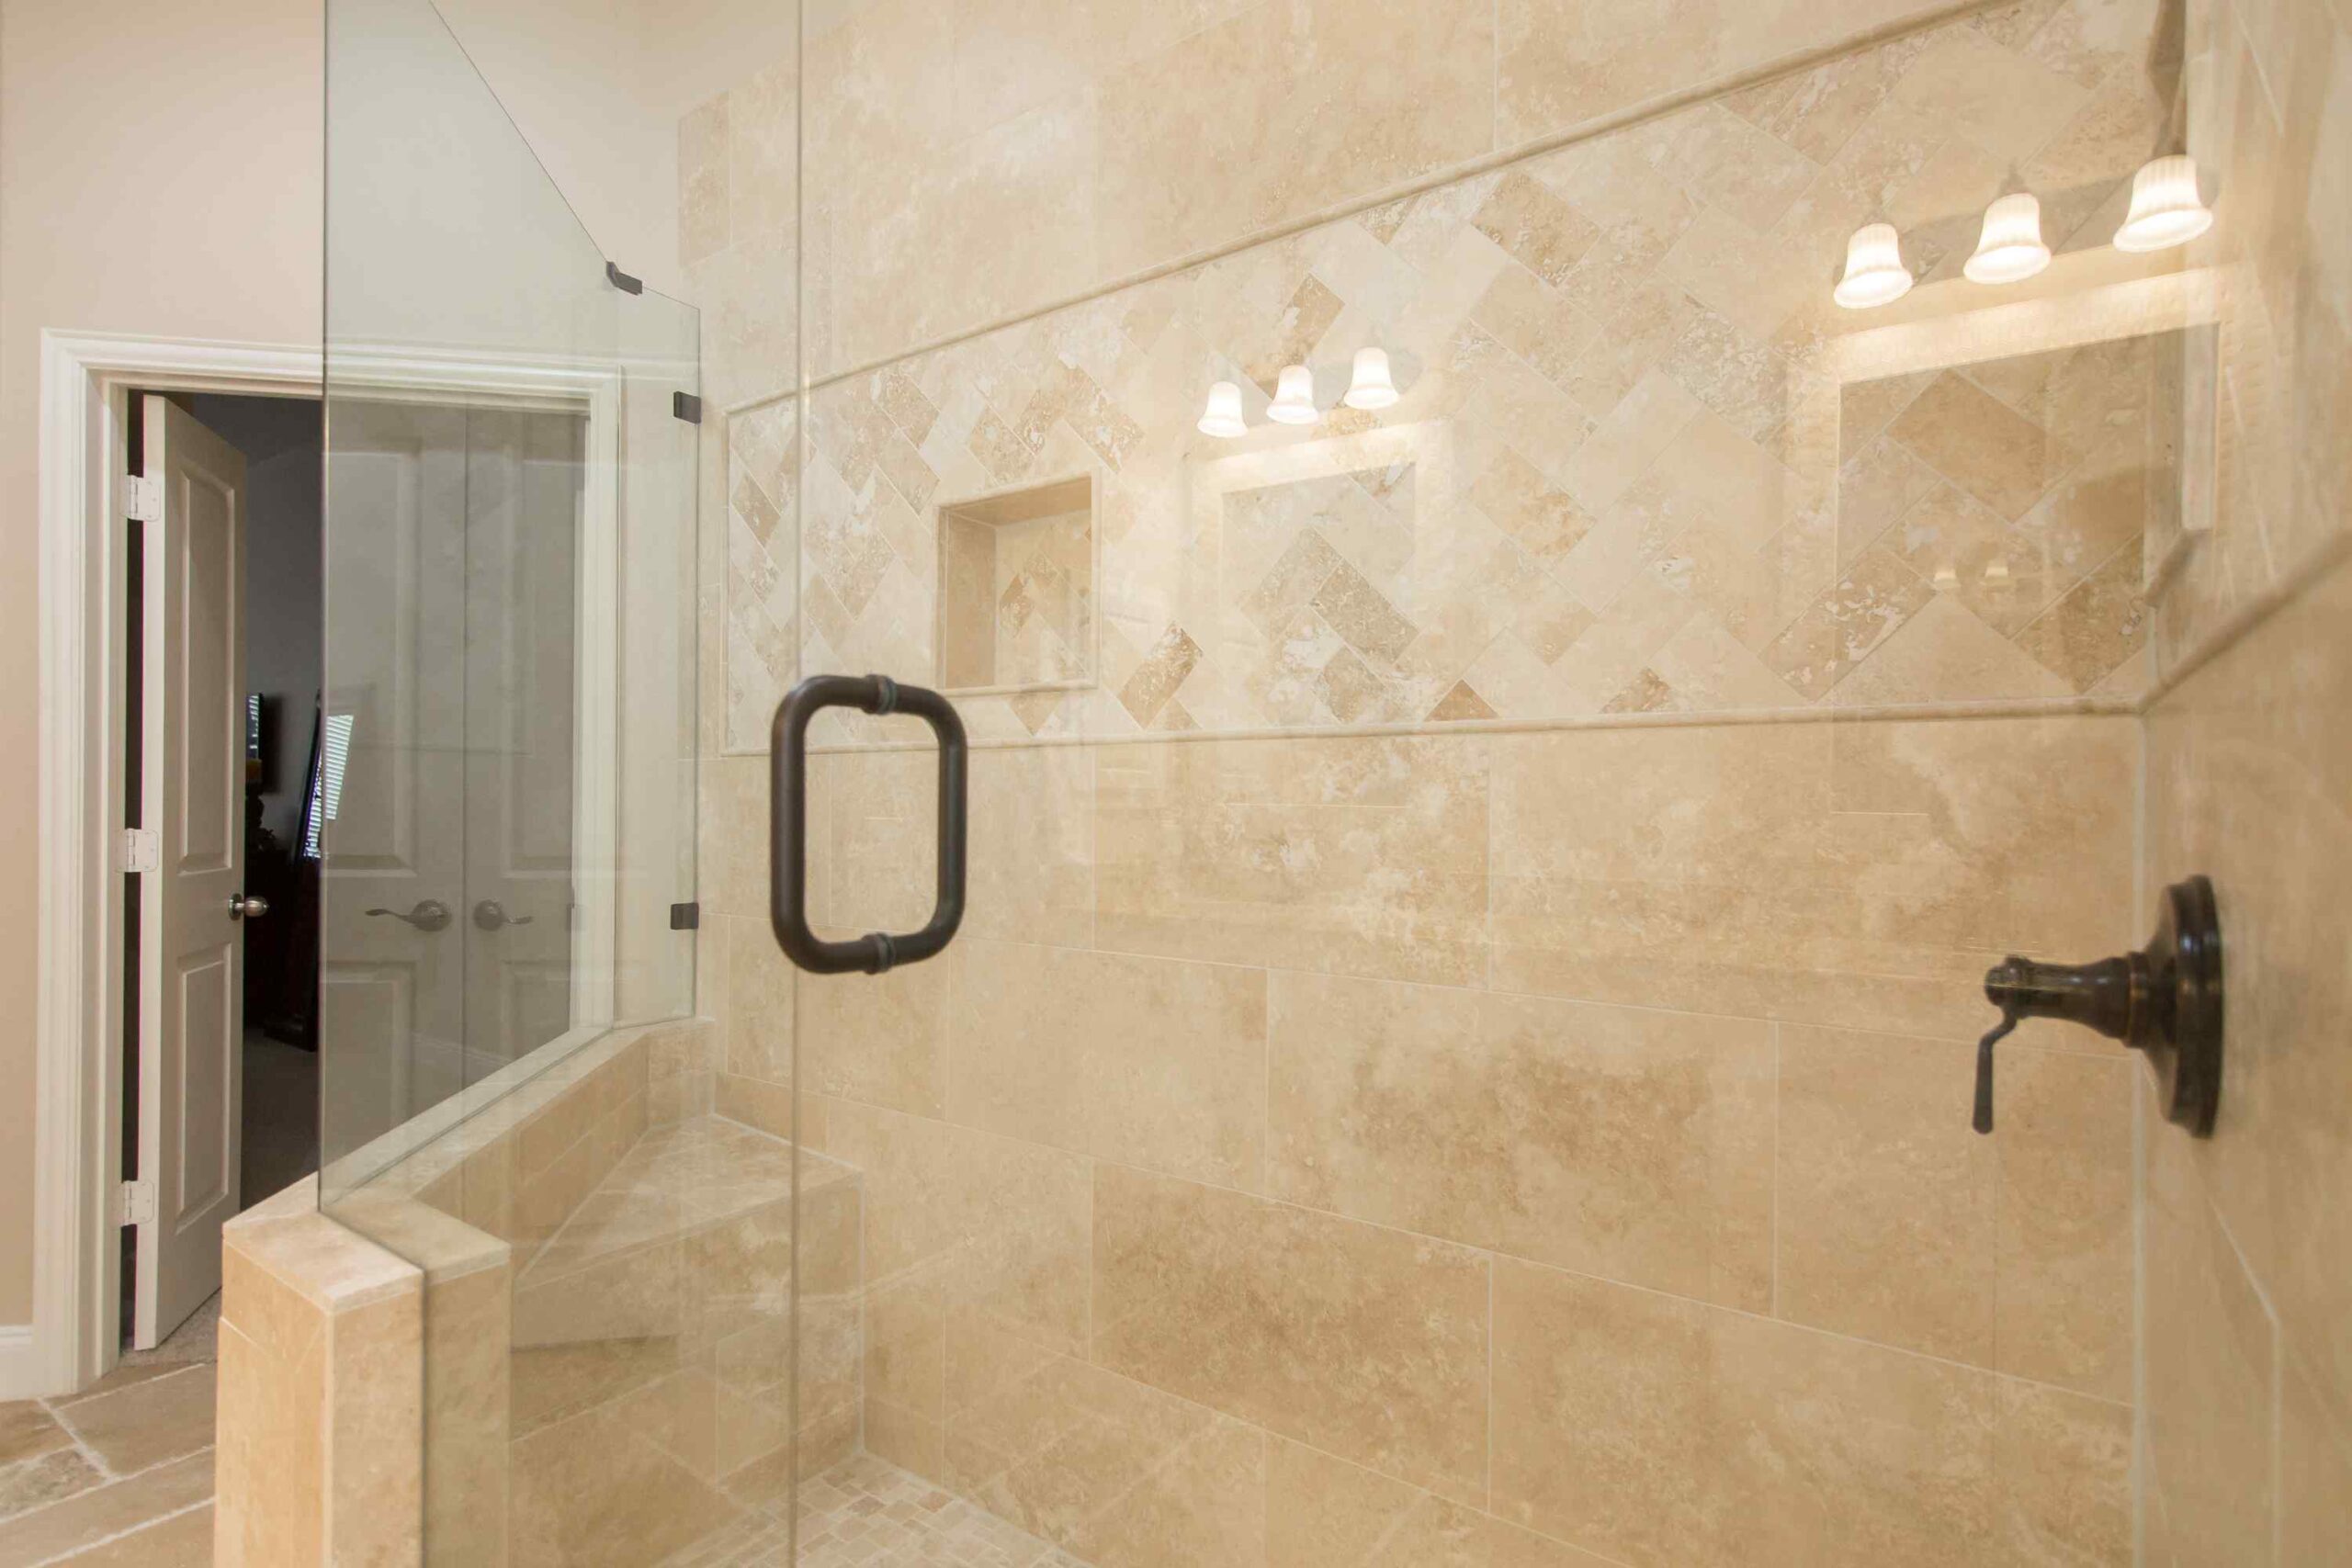 Modern Blu bathrooms glass shower - Also offers Home Remodeling Contractors in Flower Mound TX